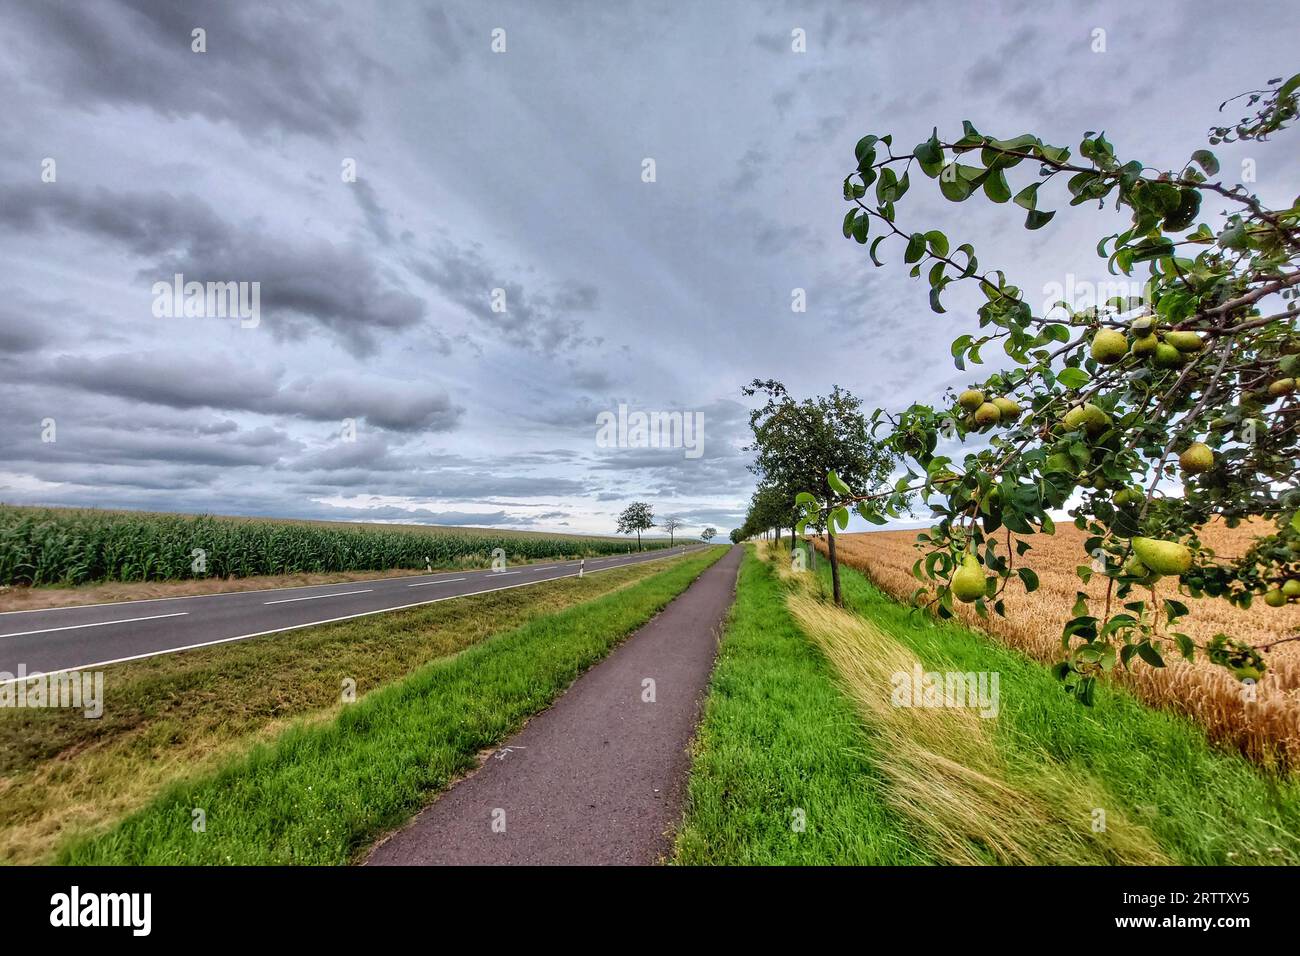 Pear trees along road and bikepath through agricultural landscape in Germany. Stock Photo